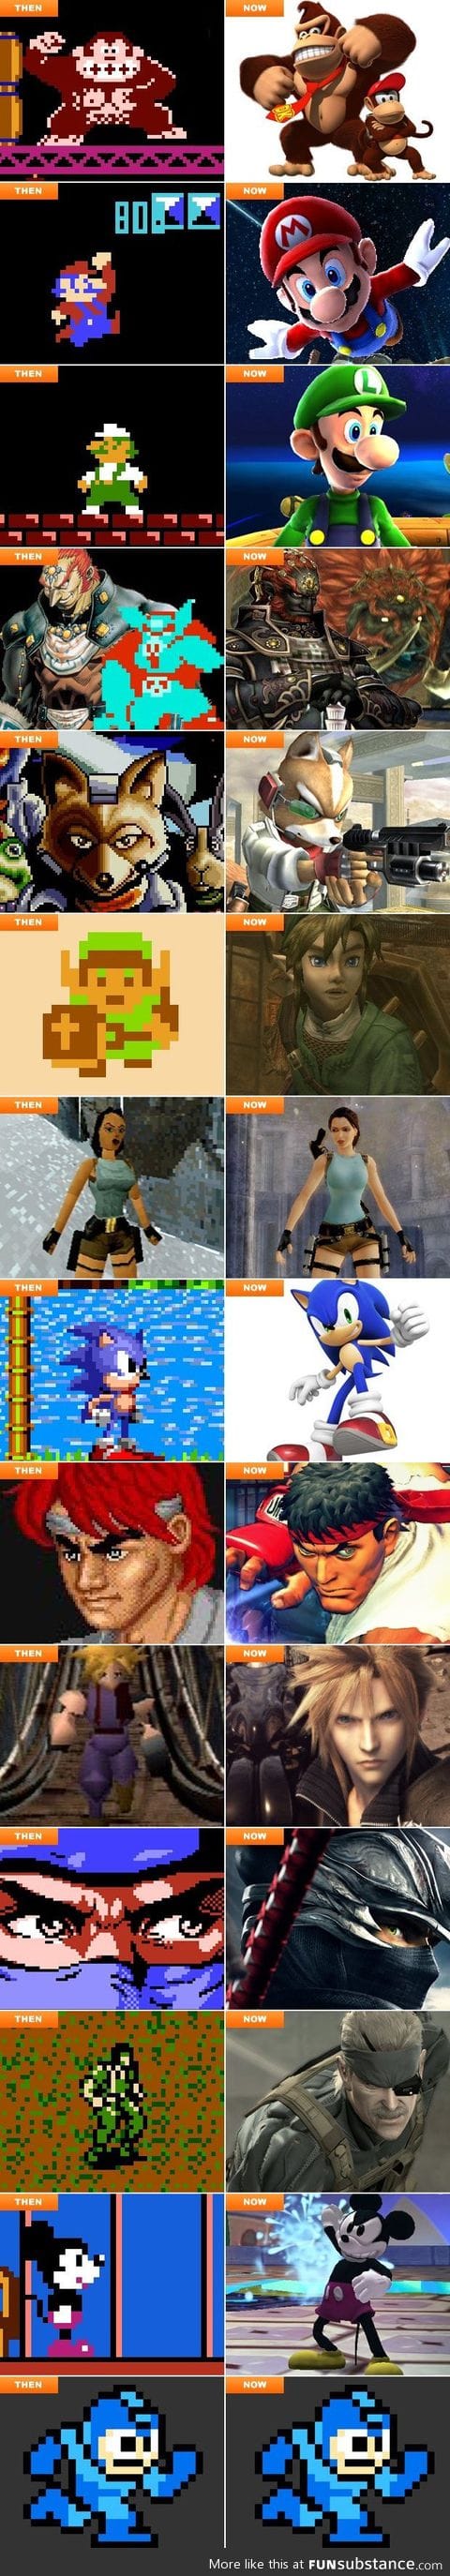 Gaming evolution over time